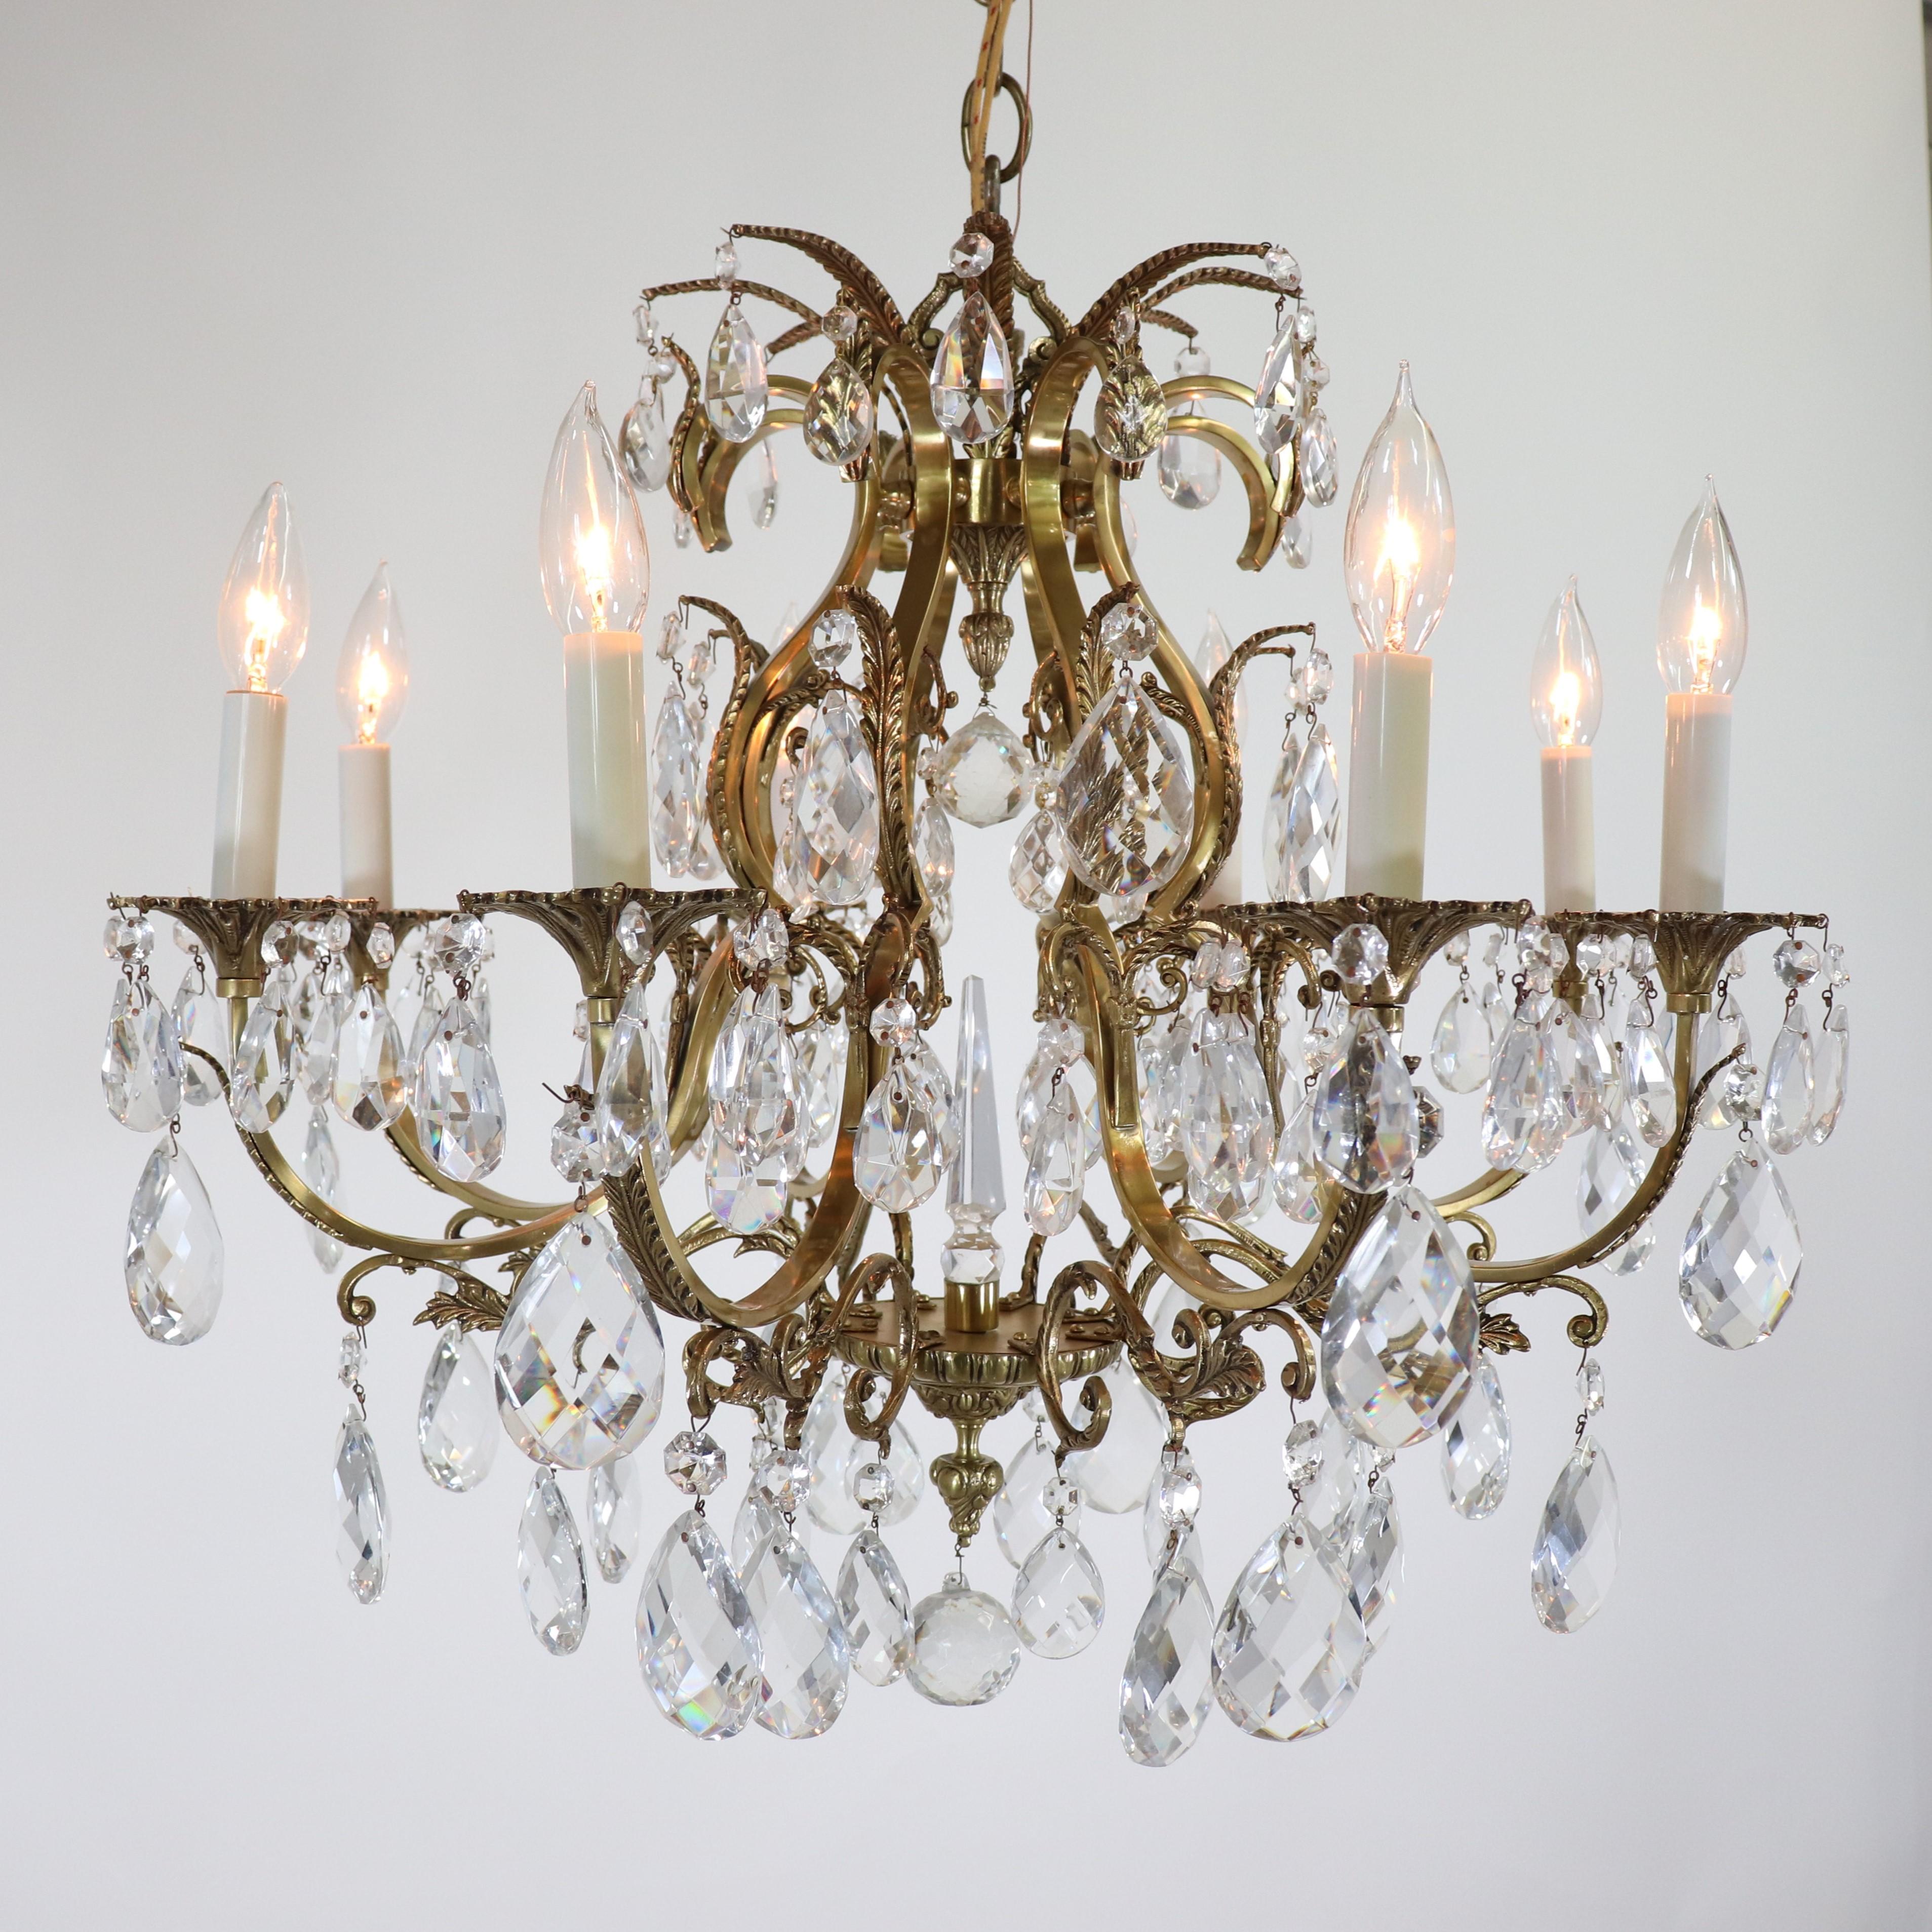 A mid-century Louis XV-style brass and crystal chandelier with bronze acanthus mounts on scroll arms forming a curvaceous birdcage frame. The chandelier is draped with classic teardrop etched crystal pendeloques and features a center crystal spear